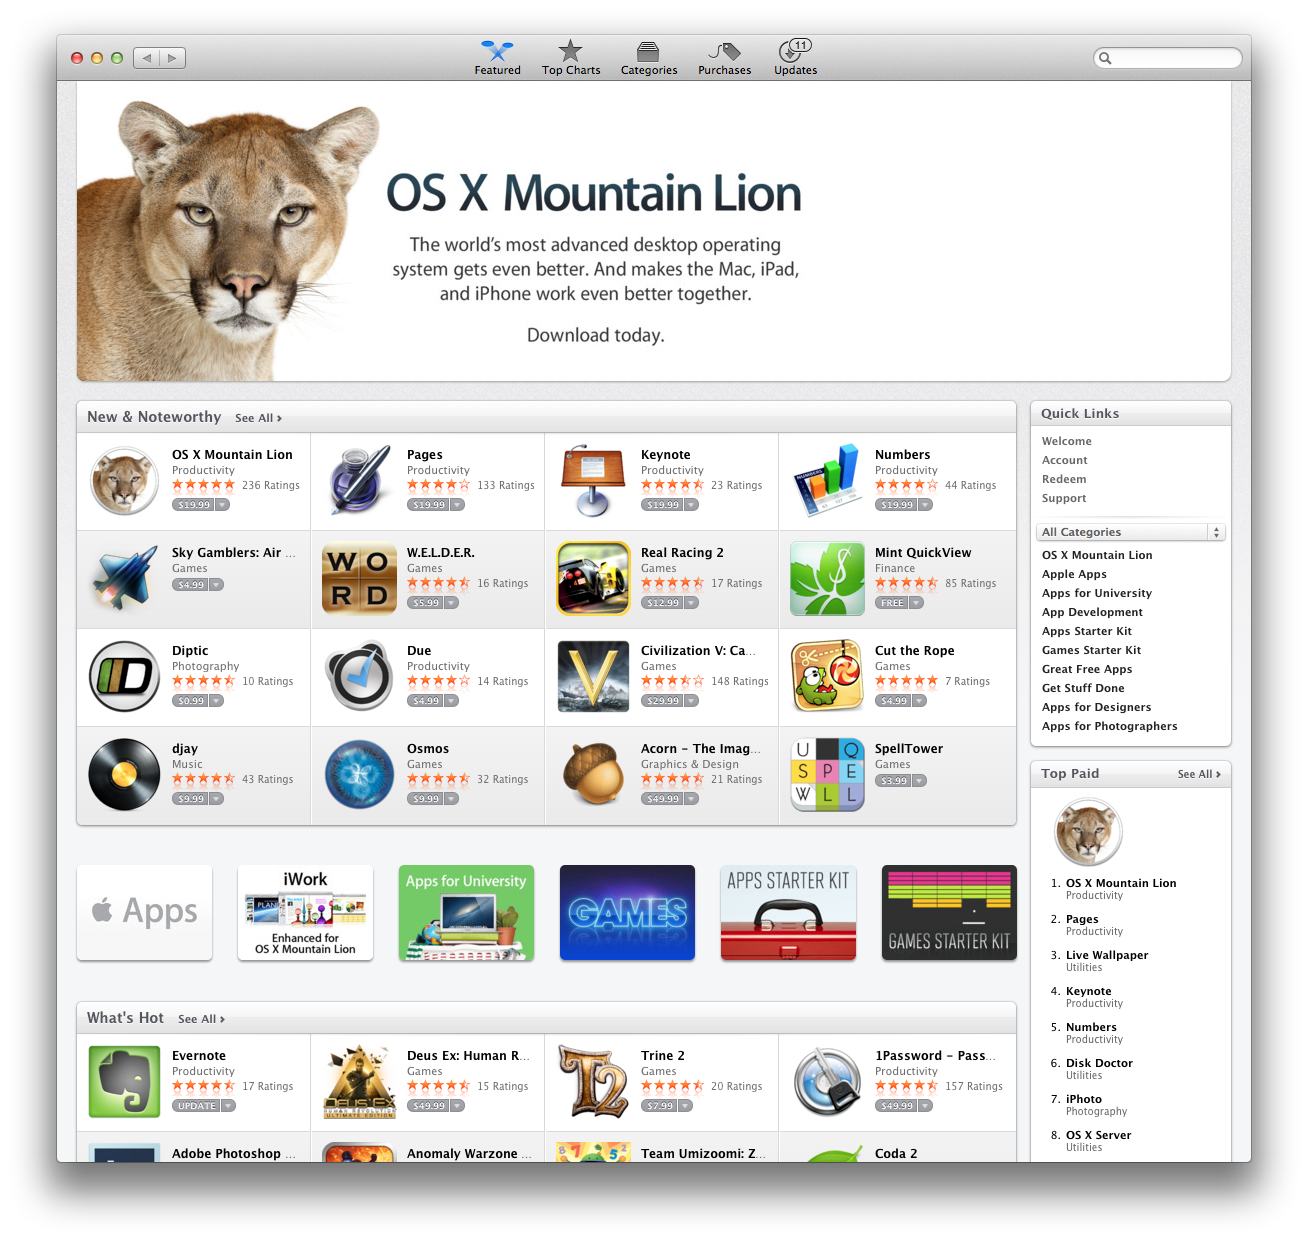 How to Install OS X Mountain Lion From the Mac App Store [Video]